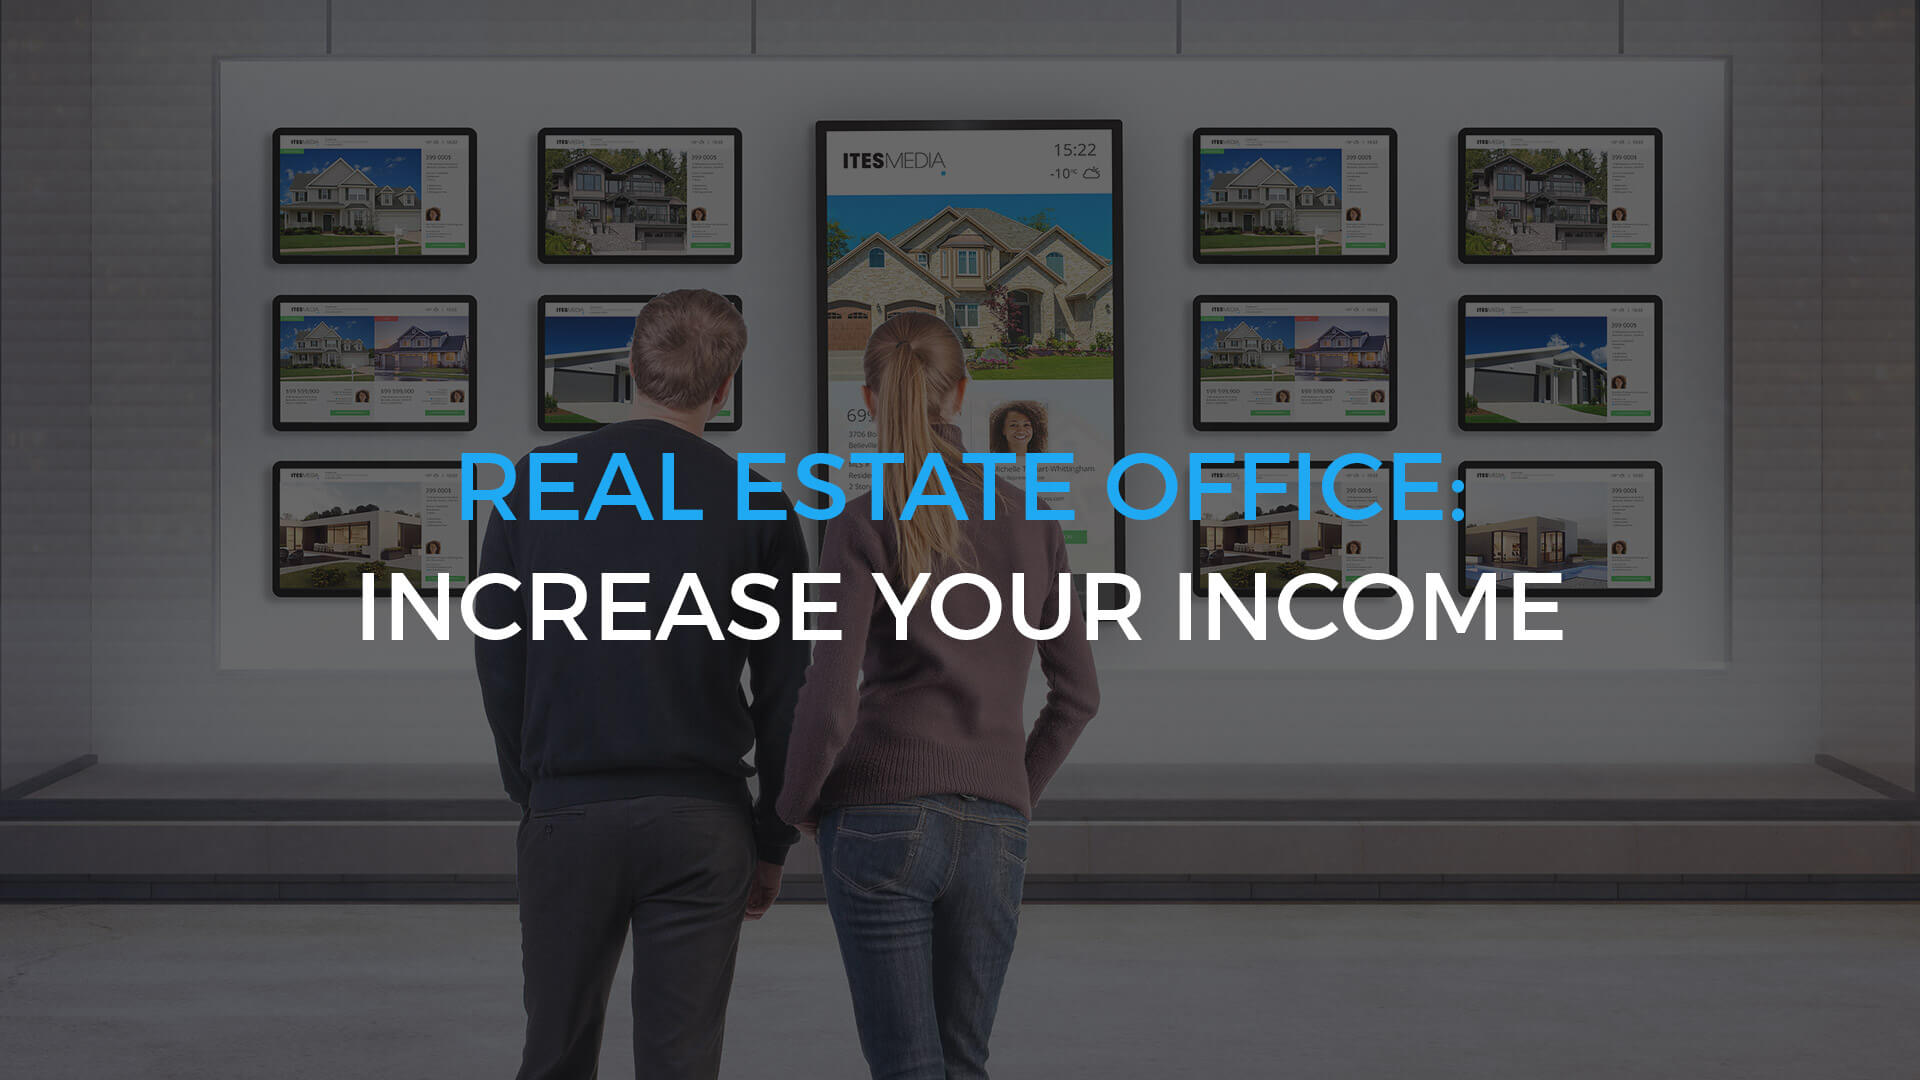 How can digital signage increase the income of your real estate office?